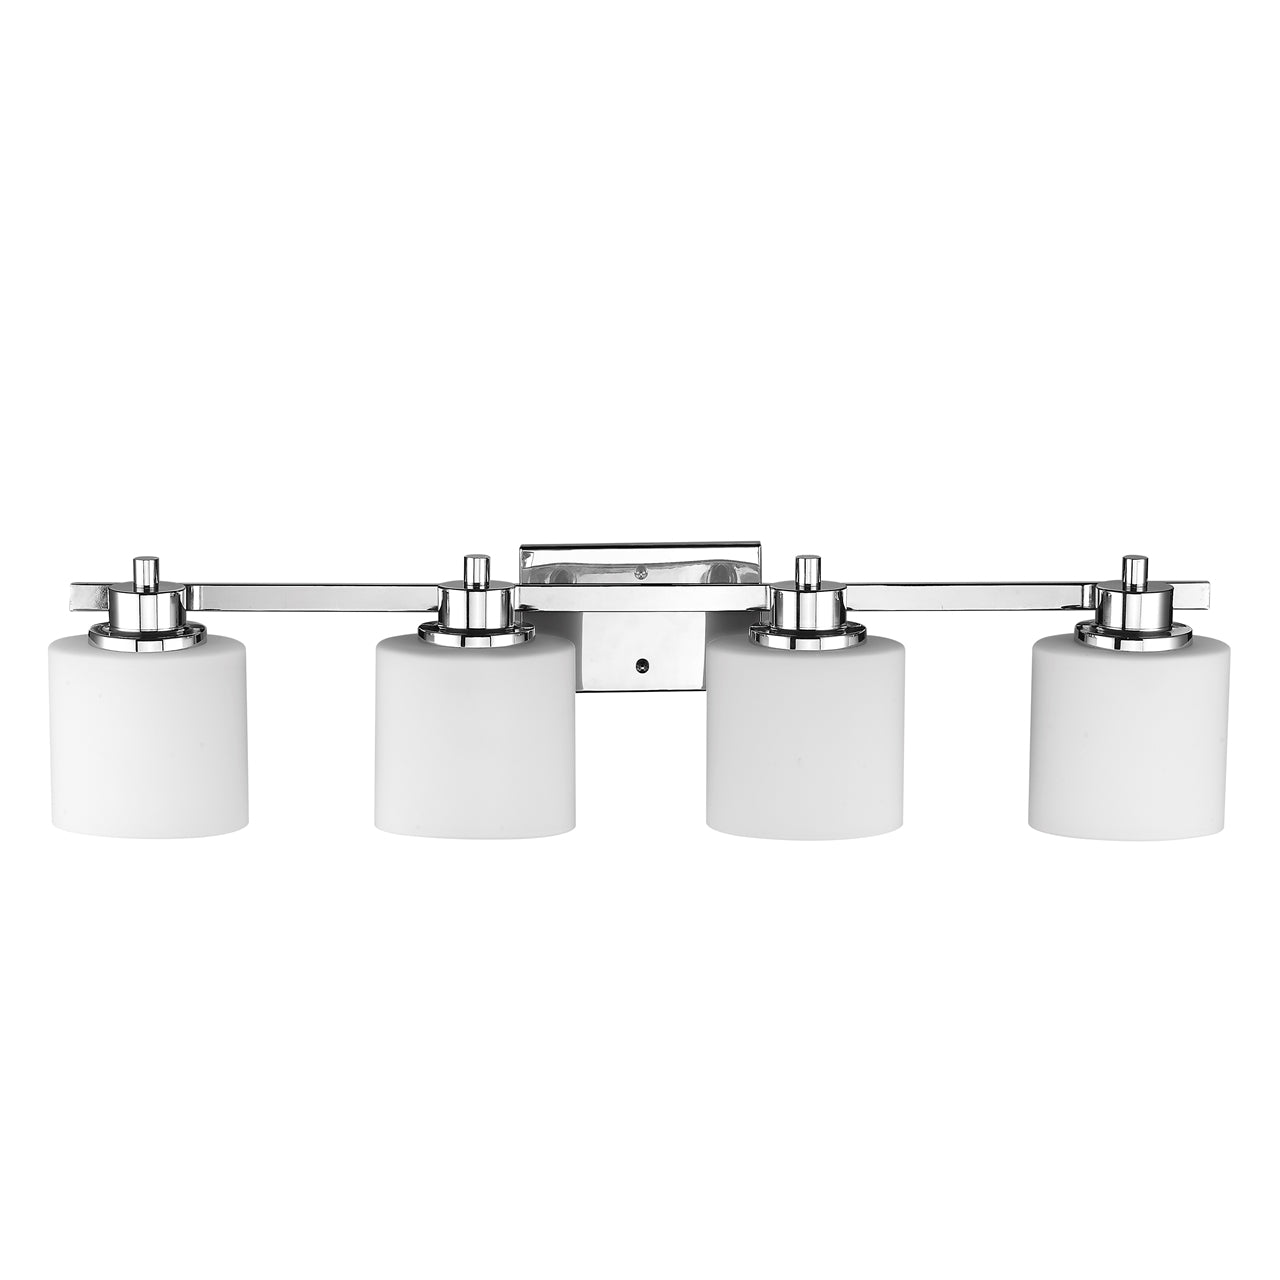 SOLBI Contemporary 4 Light Chrome Finish Bath Vanity Wall Fixture White Alabaster Glass 33" Wide